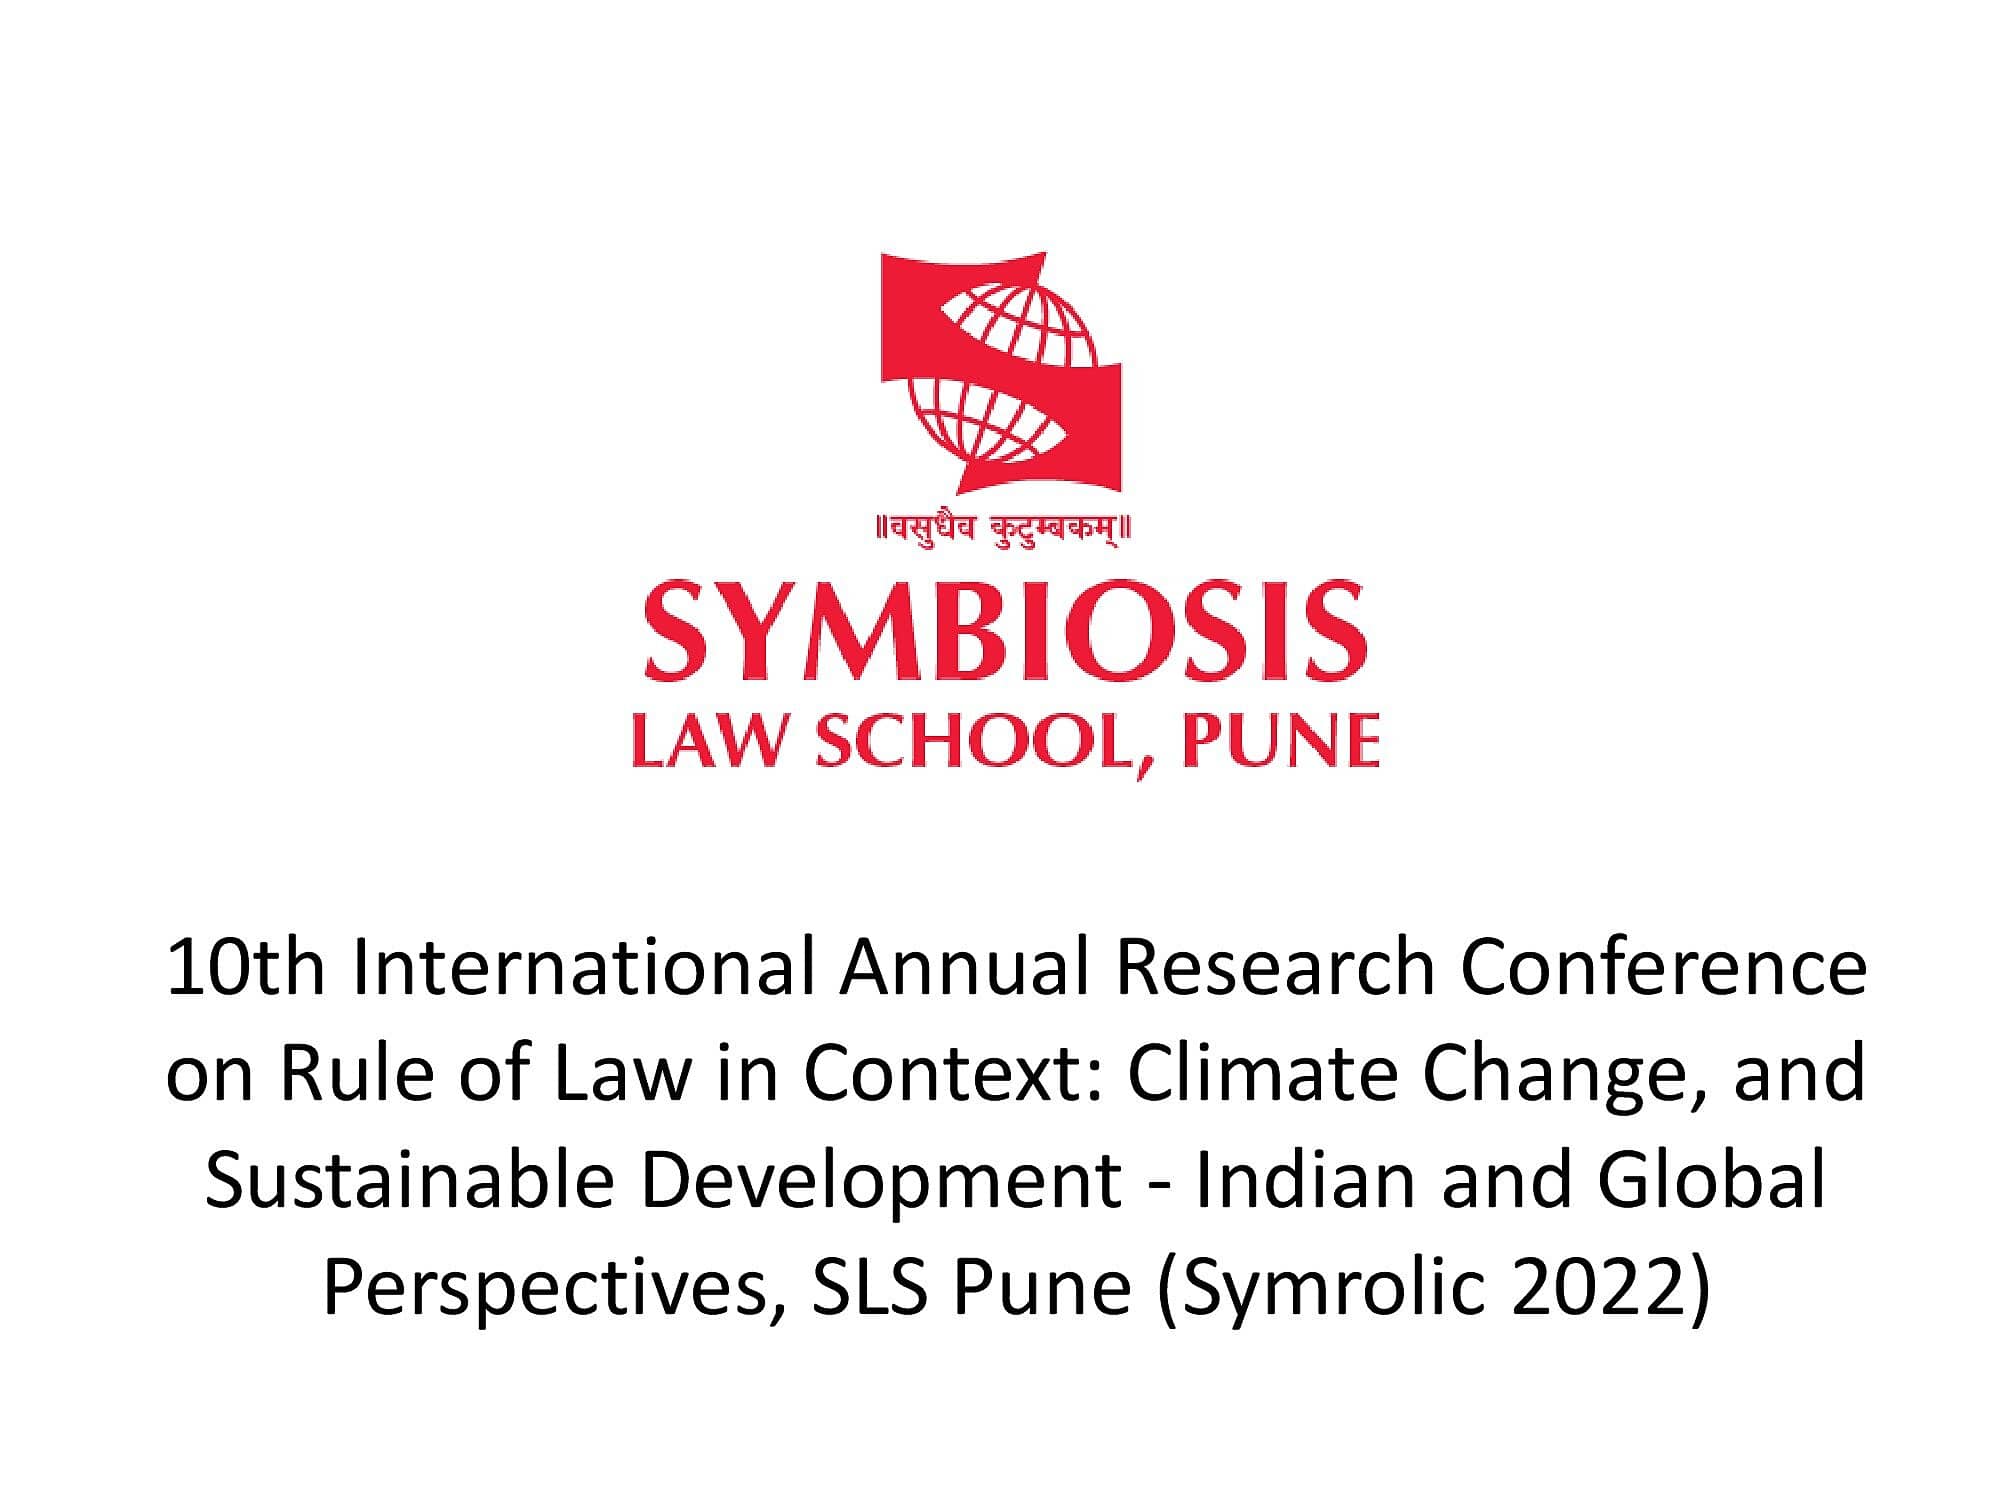 10th International Annual Research Conference on Rule of Law in Context: Climate Change, and Sustainable Development - Indian and Global Perspectives, SLS Pune (Symrolic 2022)